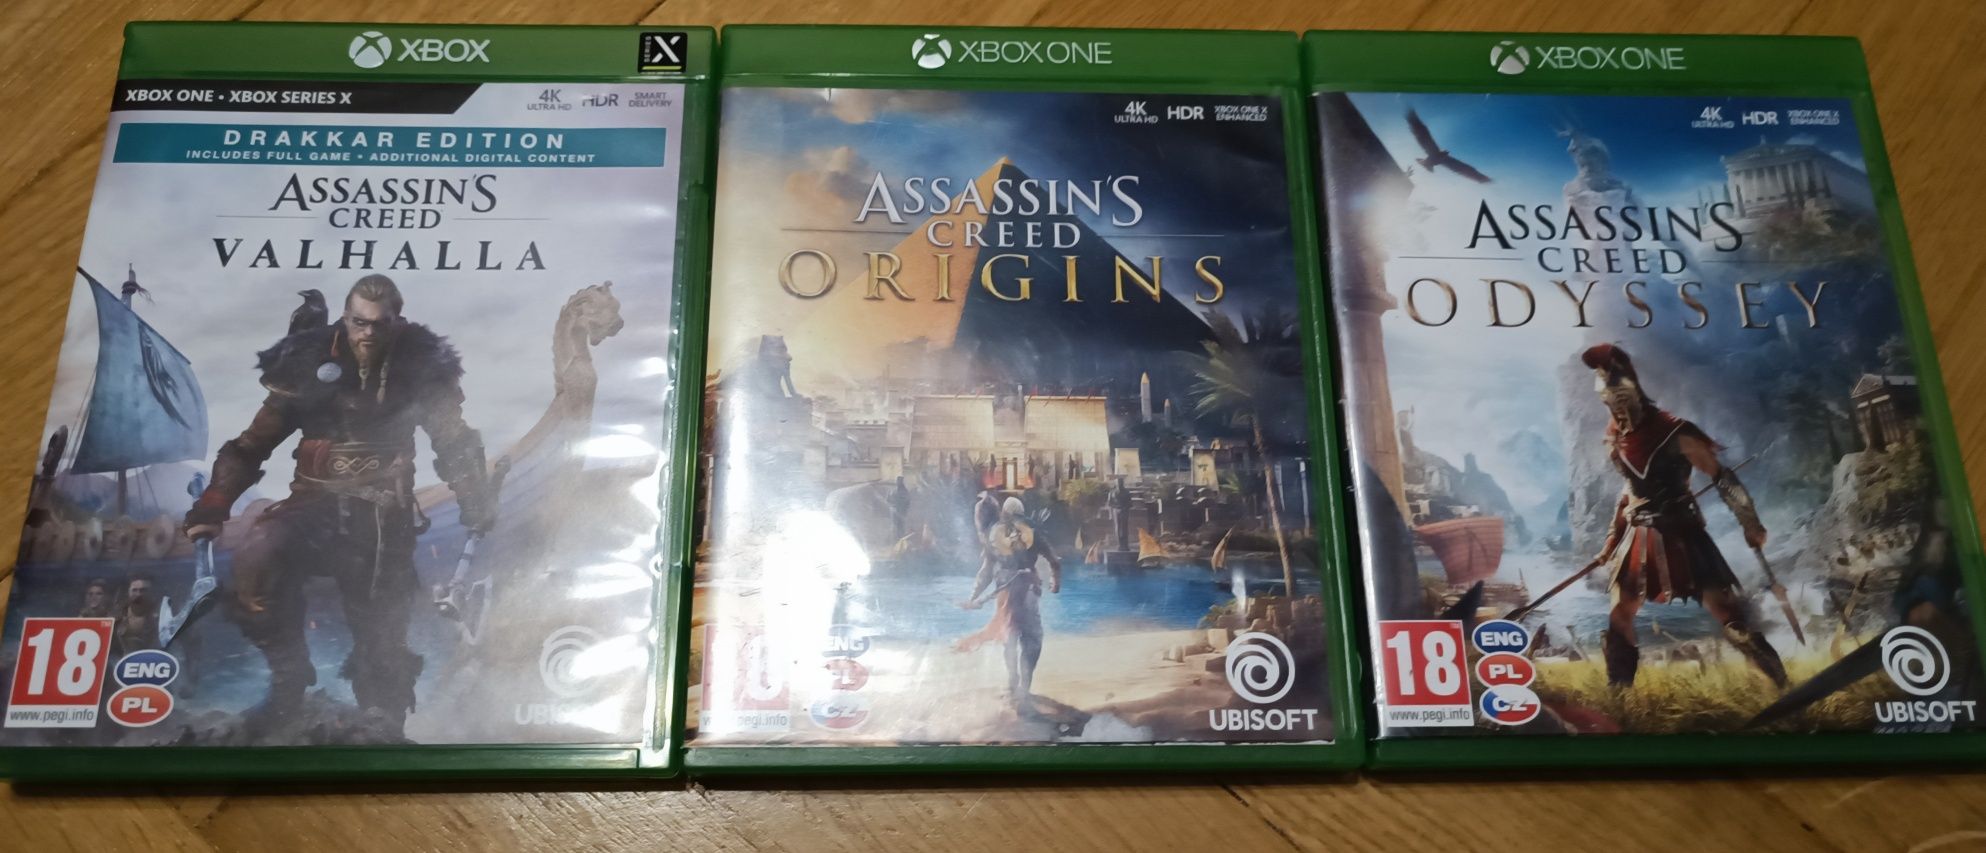 3pac Assassin's Creed: origins, odyssey, valhalla Xbox one series